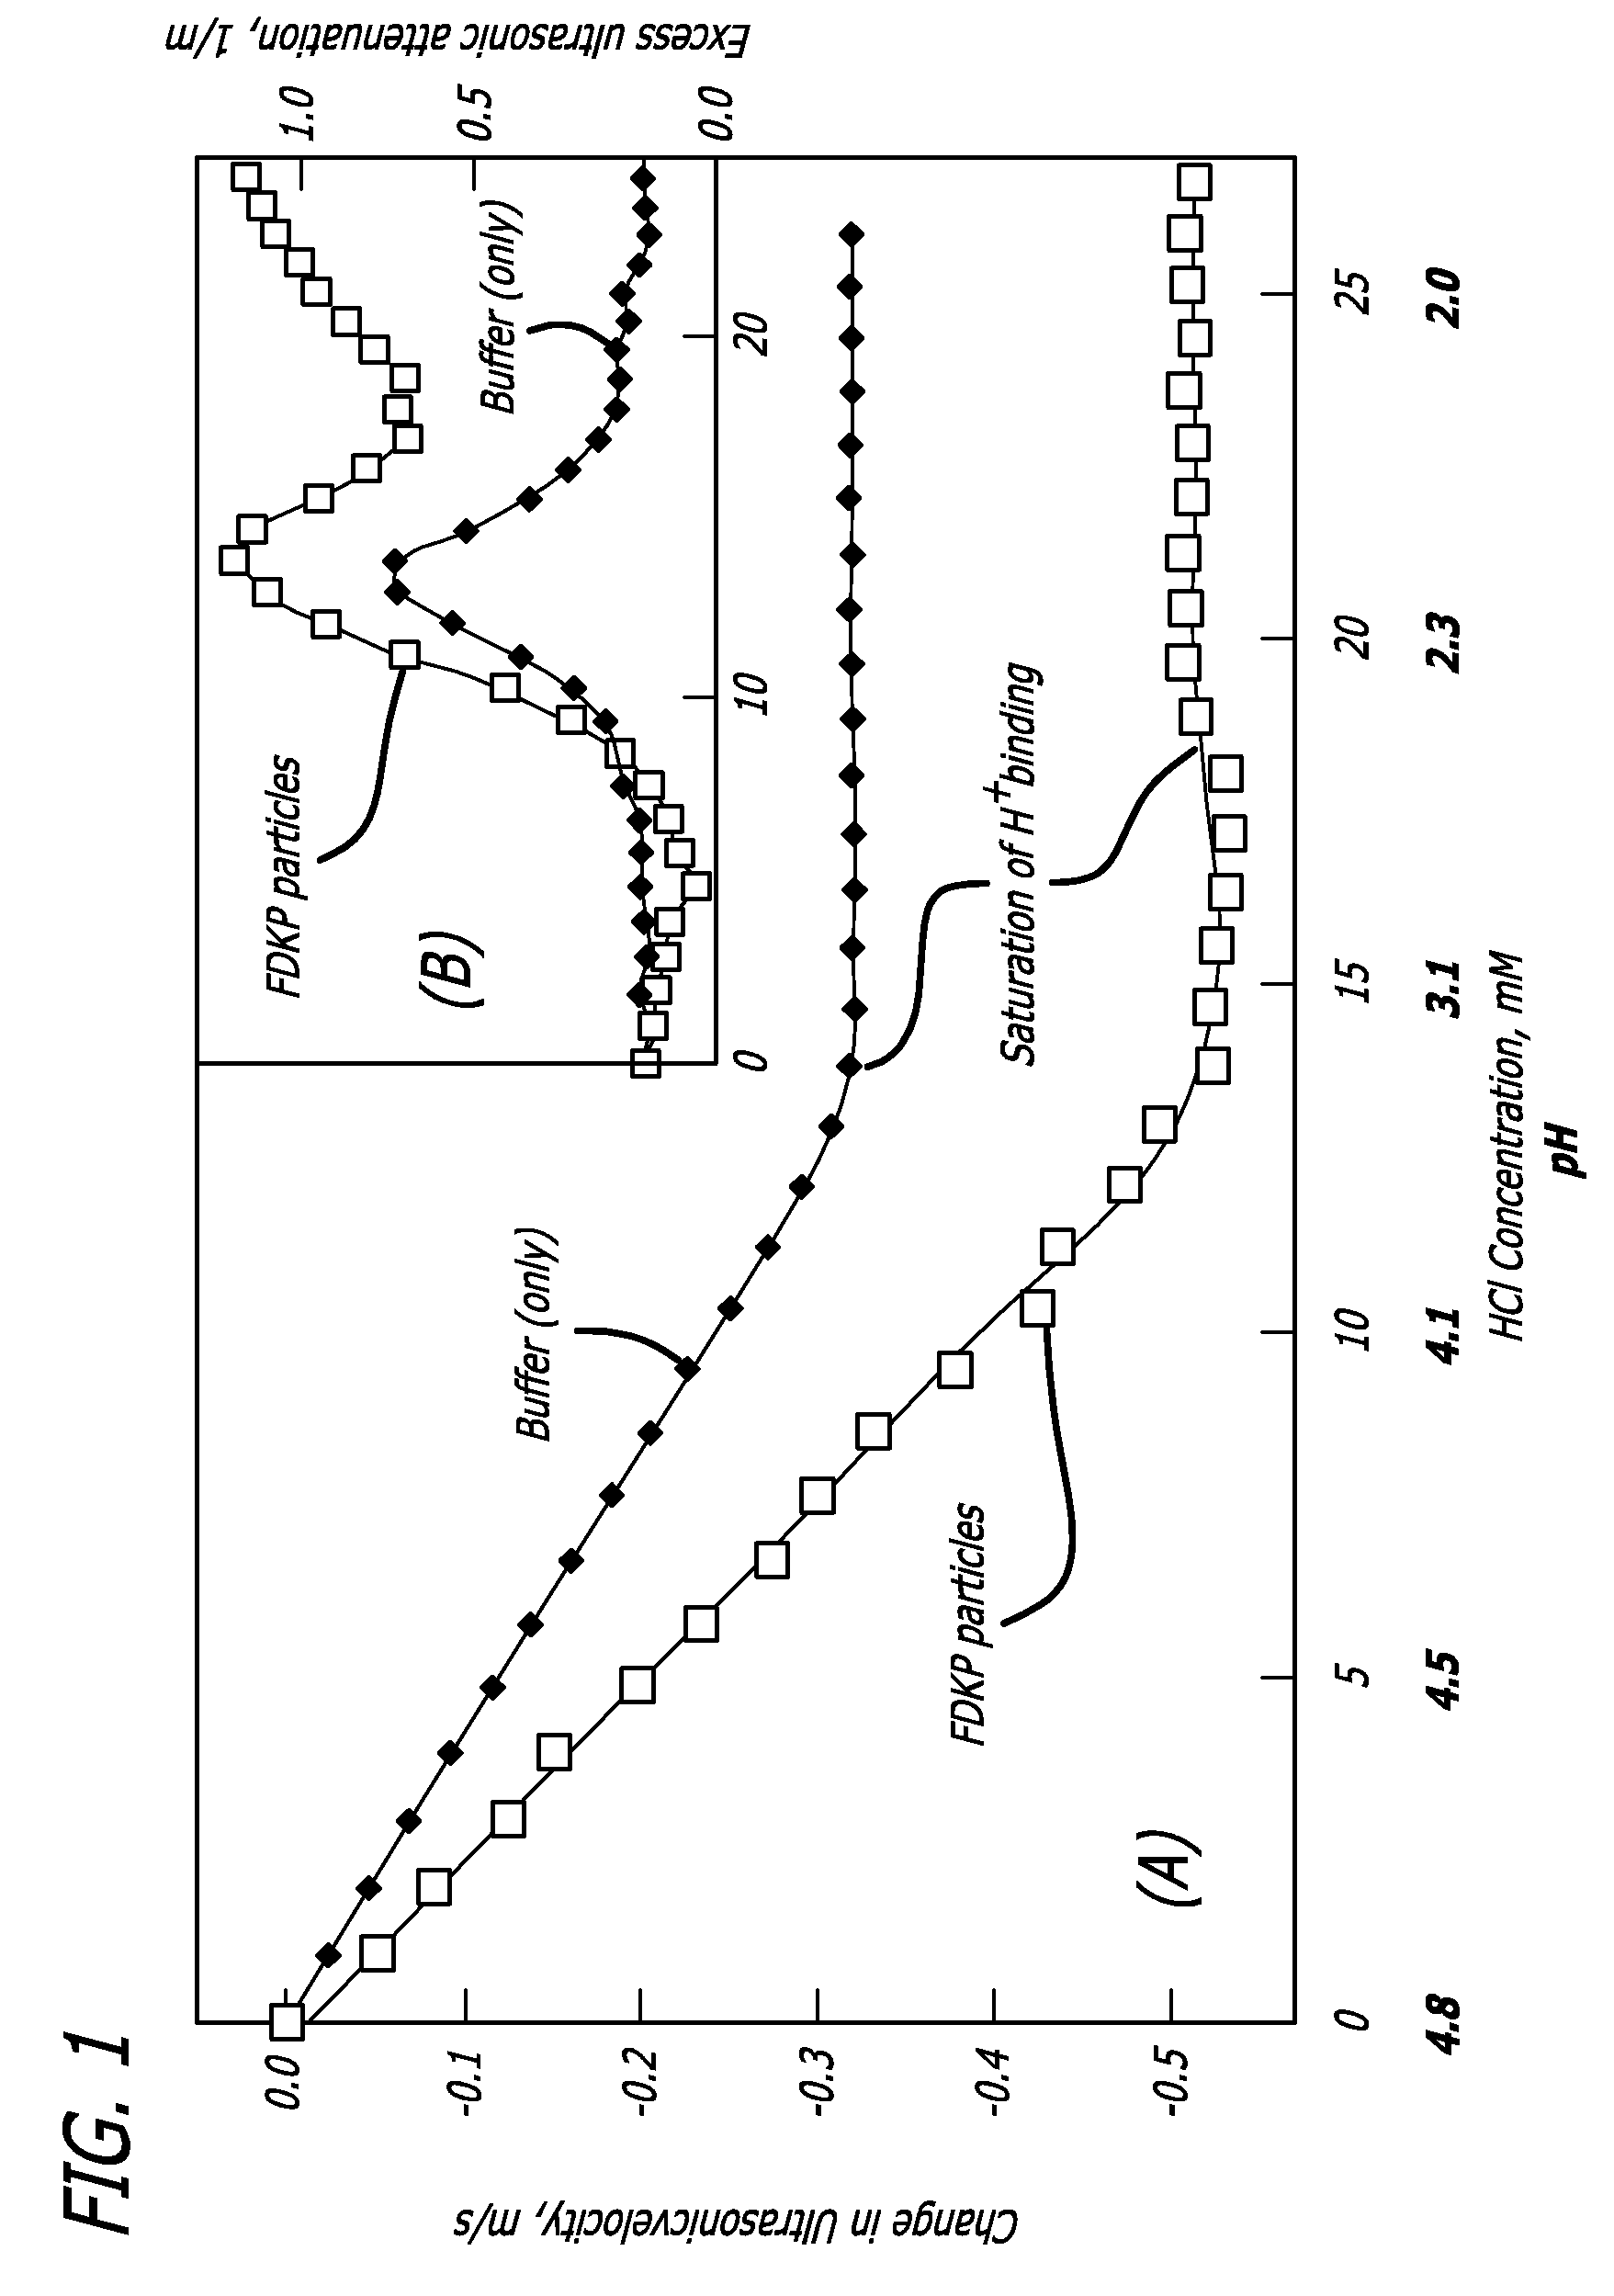 Method of drug formulation based on increasing the affinity of crystalline microparticle surfaces for active agents